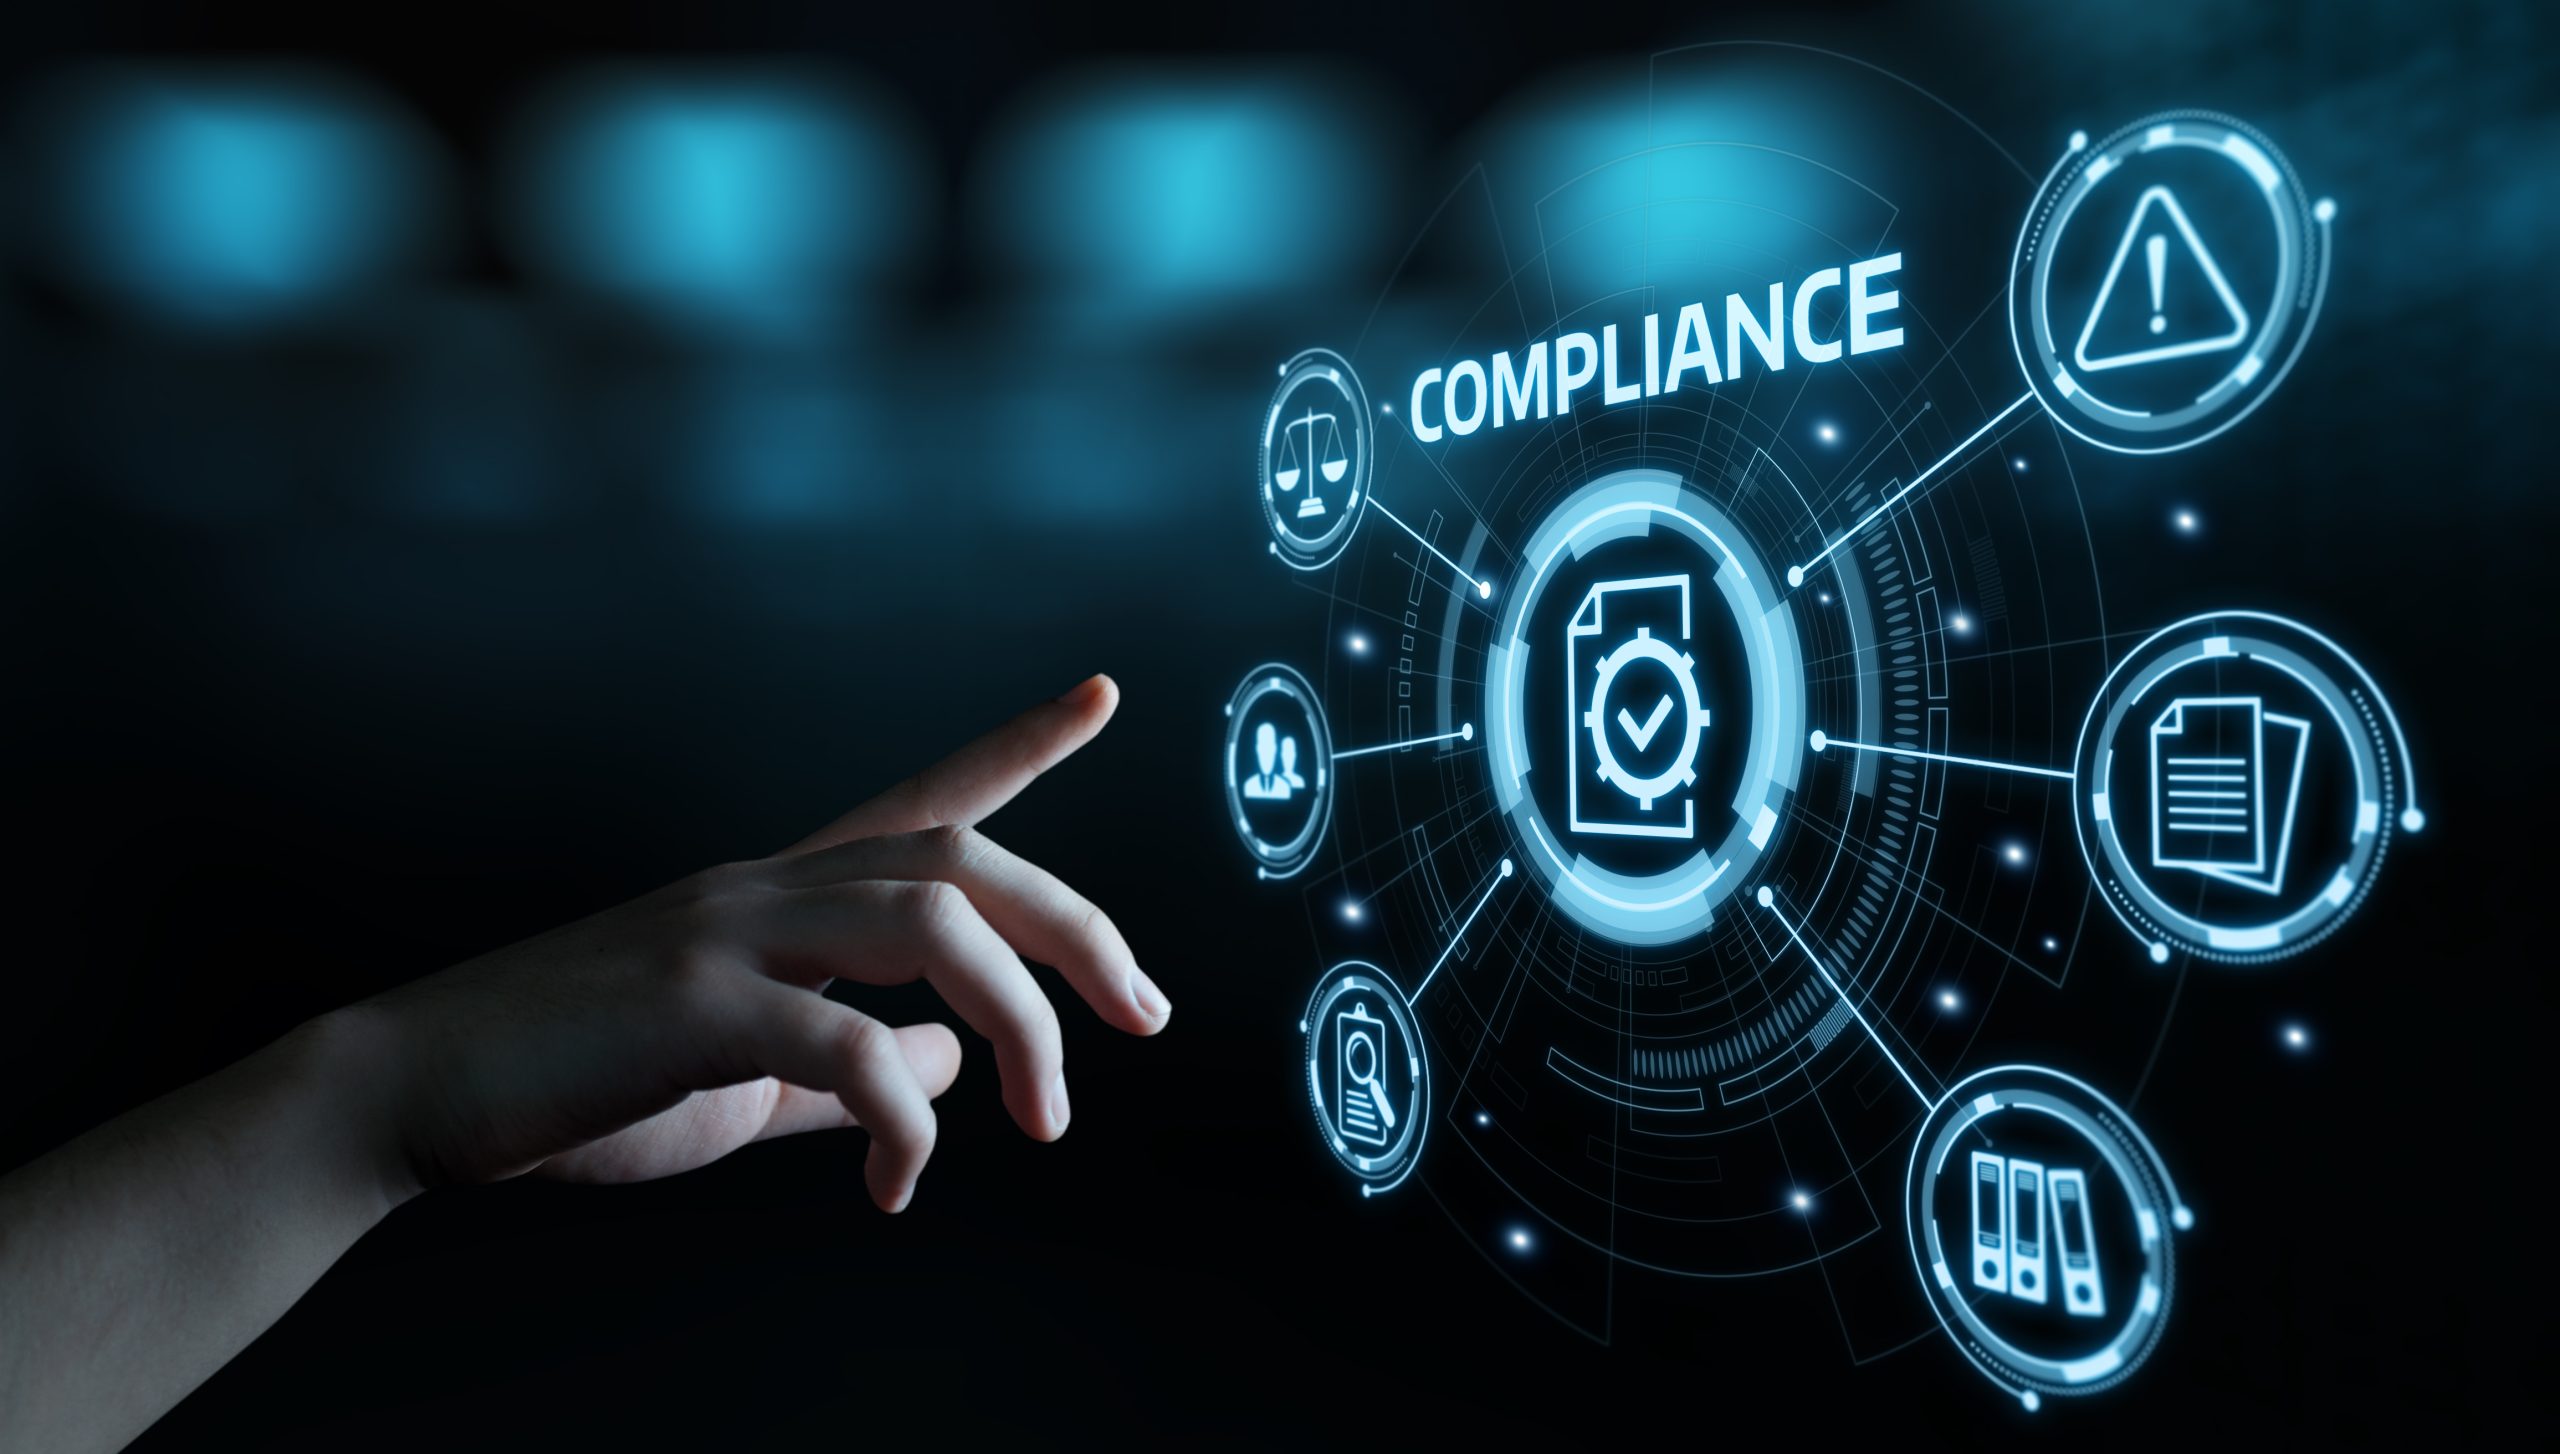 STIR/SHAKEN Compliance and Call Identity Management: Streamlining Operations for Service Providers